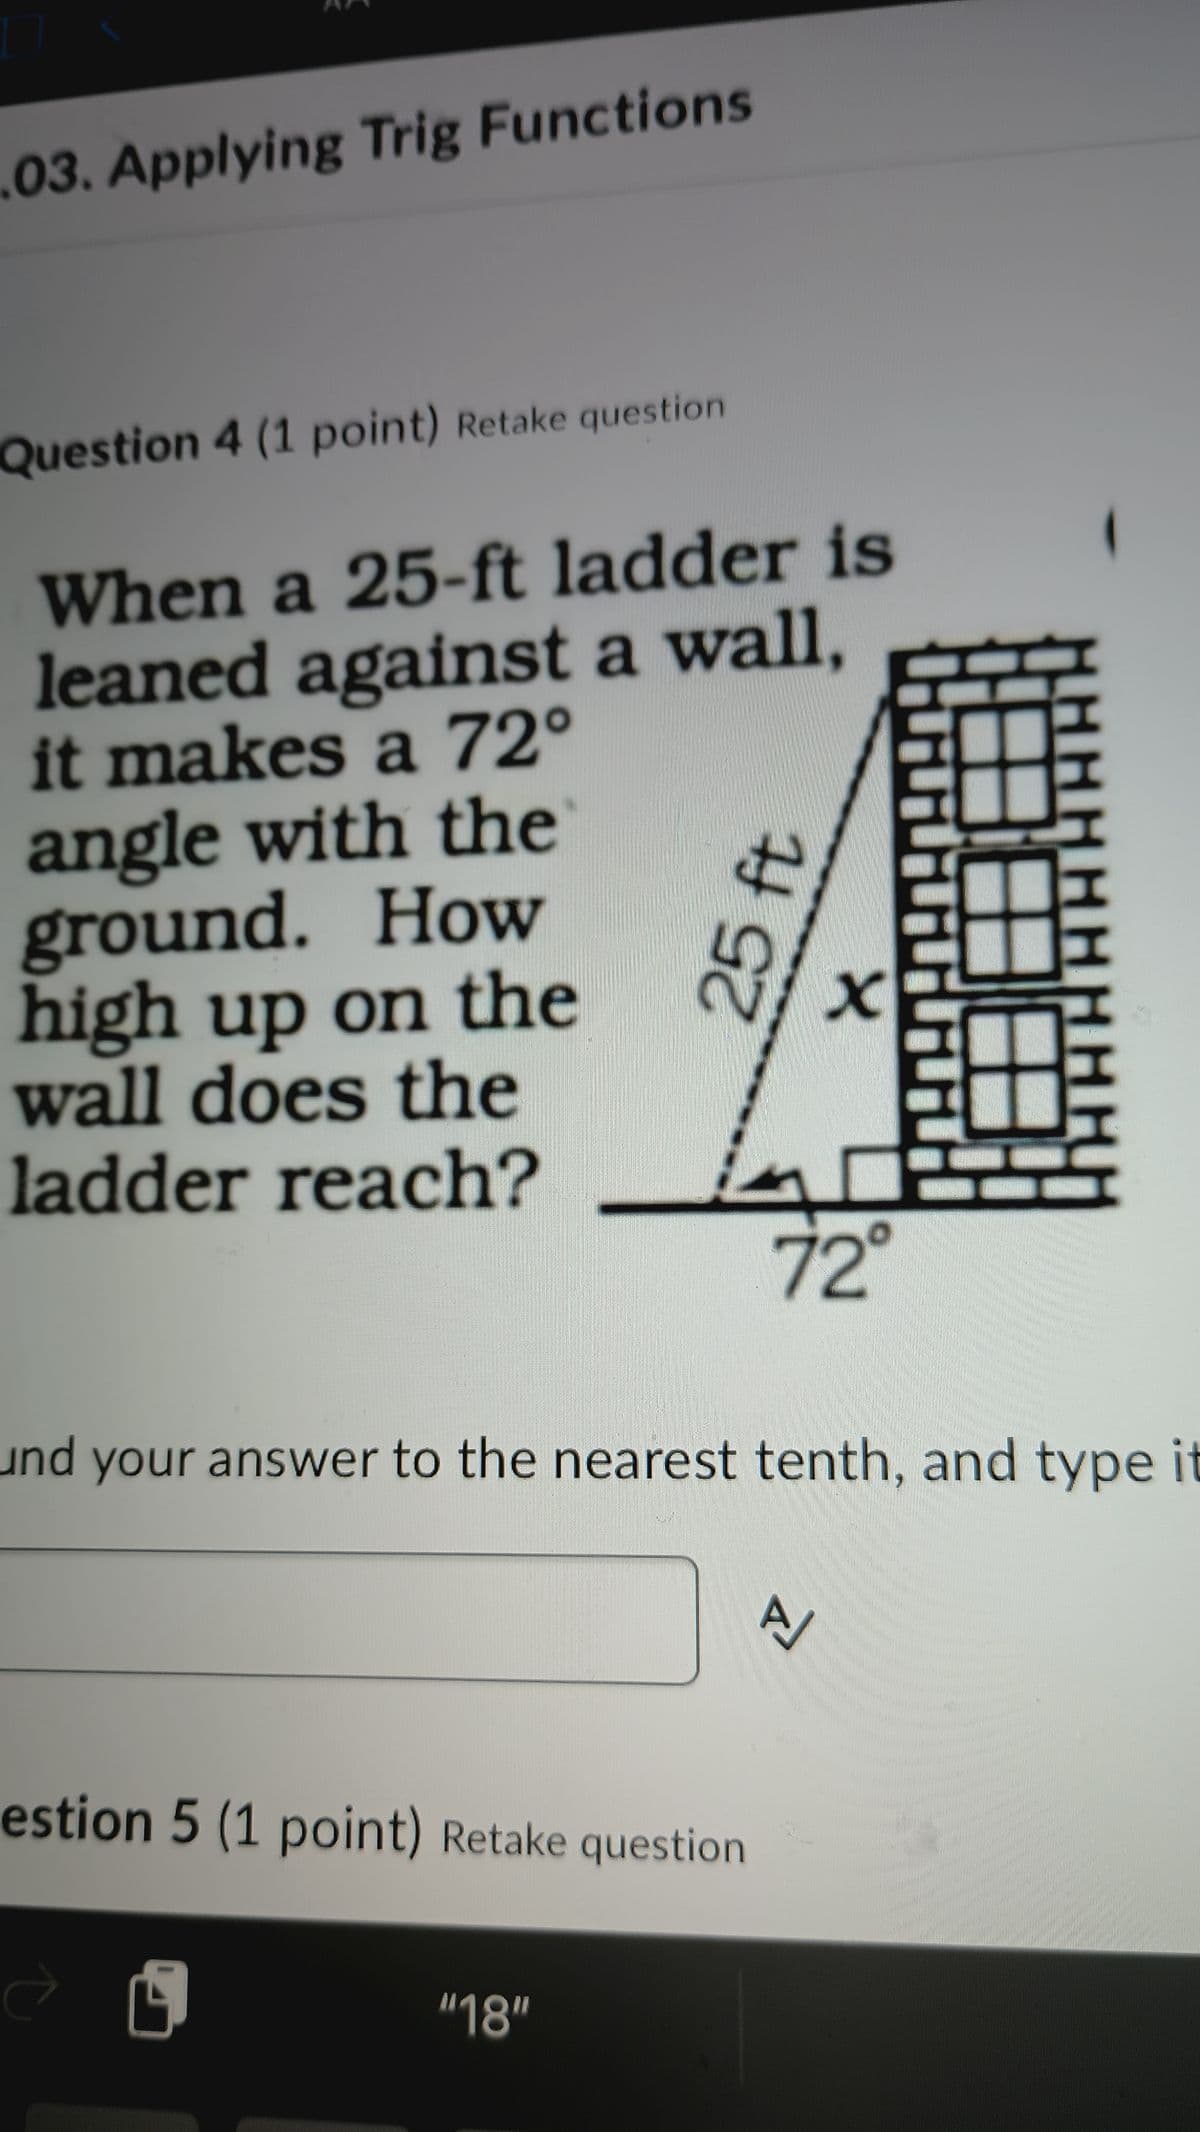 03. Applying Trig Functions
Question 4 (1 point) Retake question
When a 25-ft ladder is
leaned against a wall,
it makes a 72°
angle with the
ground. How
high up on the
wall does the
ladder reach?
25 ft
72°
und your answer to the nearest tenth, and type it
estion 5 (1 point) Retake question
"18"
A